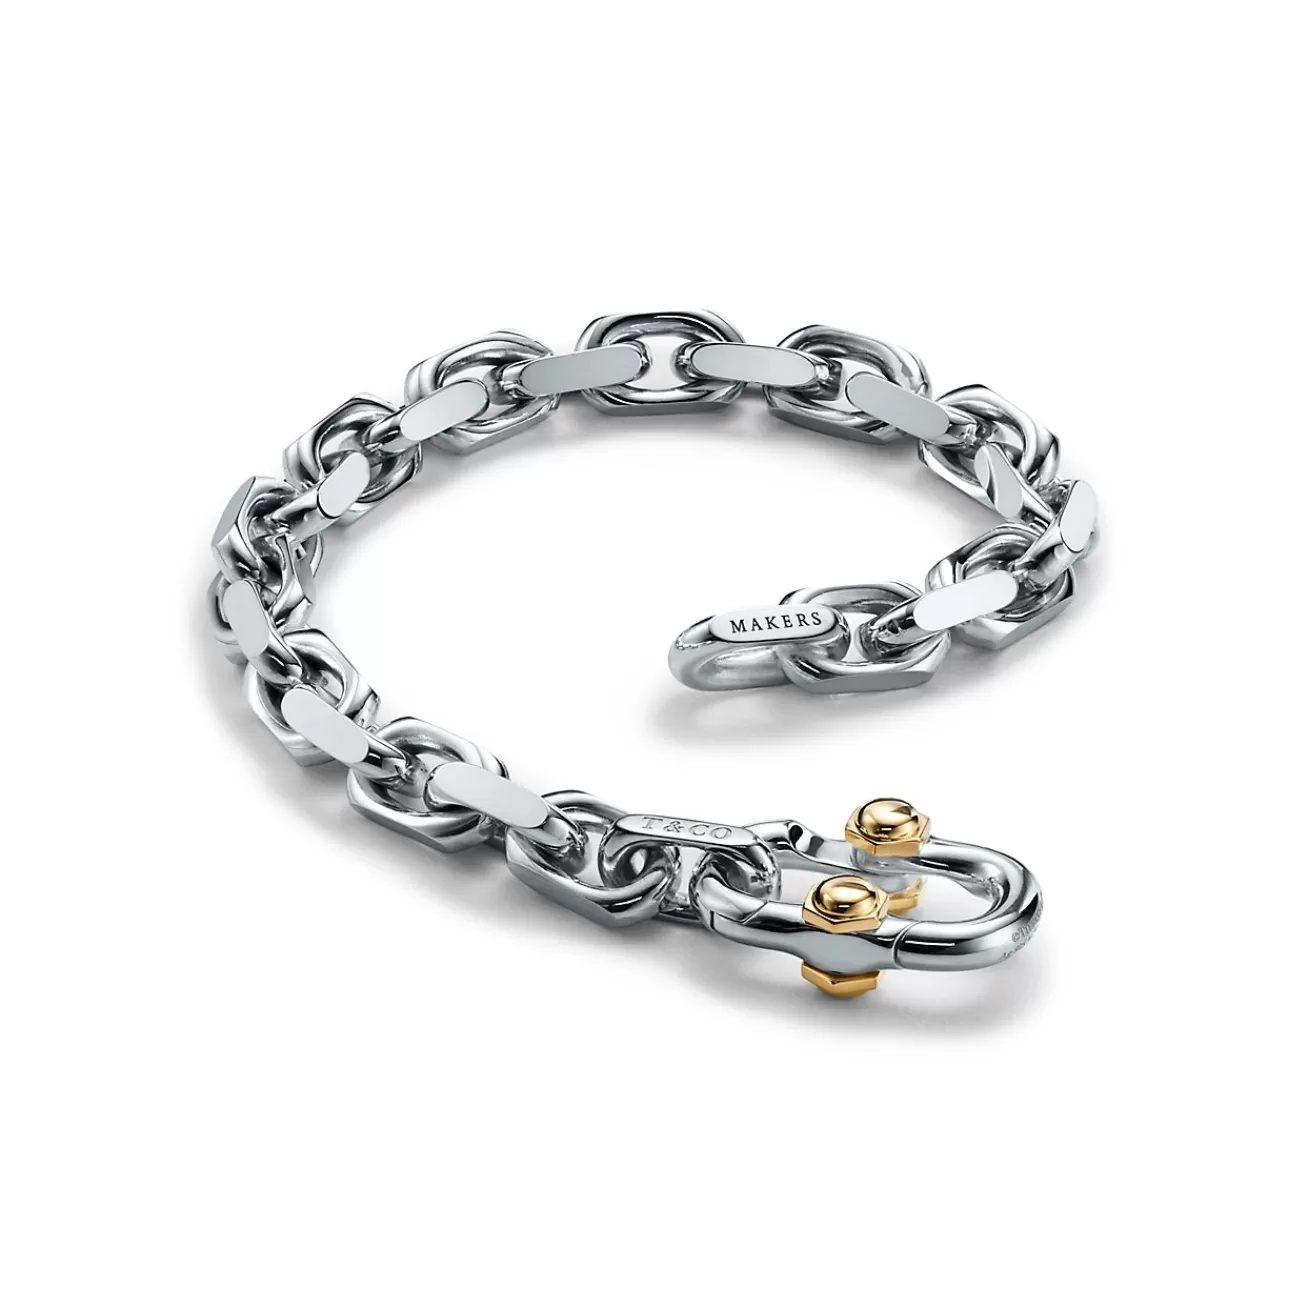 Tiffany & Co. Tiffany 1837® Makers wide chain bracelet in sterling silver and gold, medium. | ^ Bracelets | Men's Jewelry